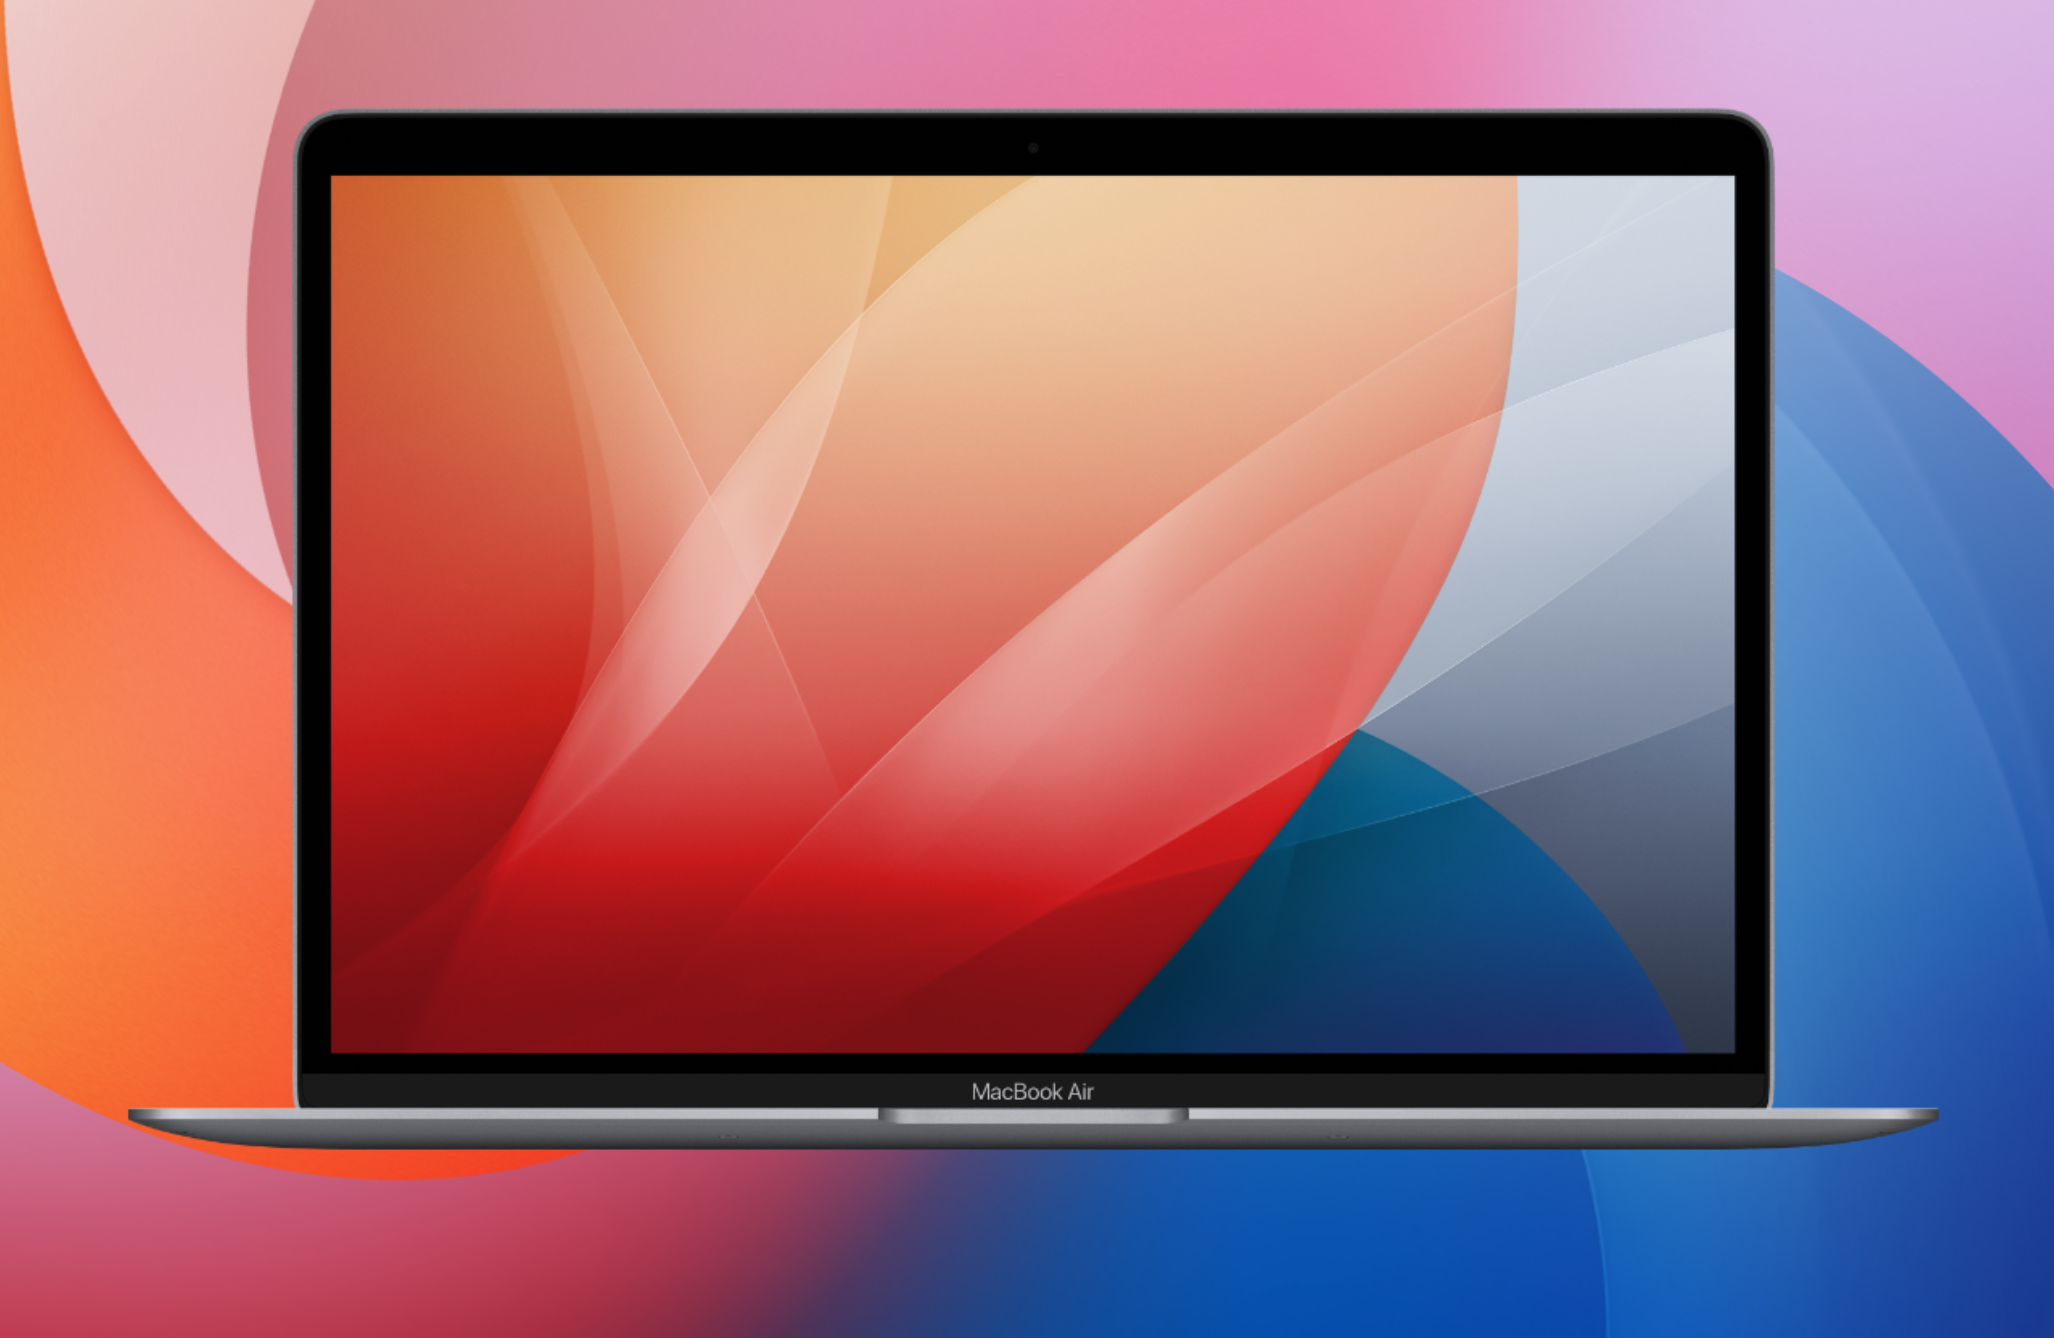 Dynamic Wallpapers on the Mac App Store